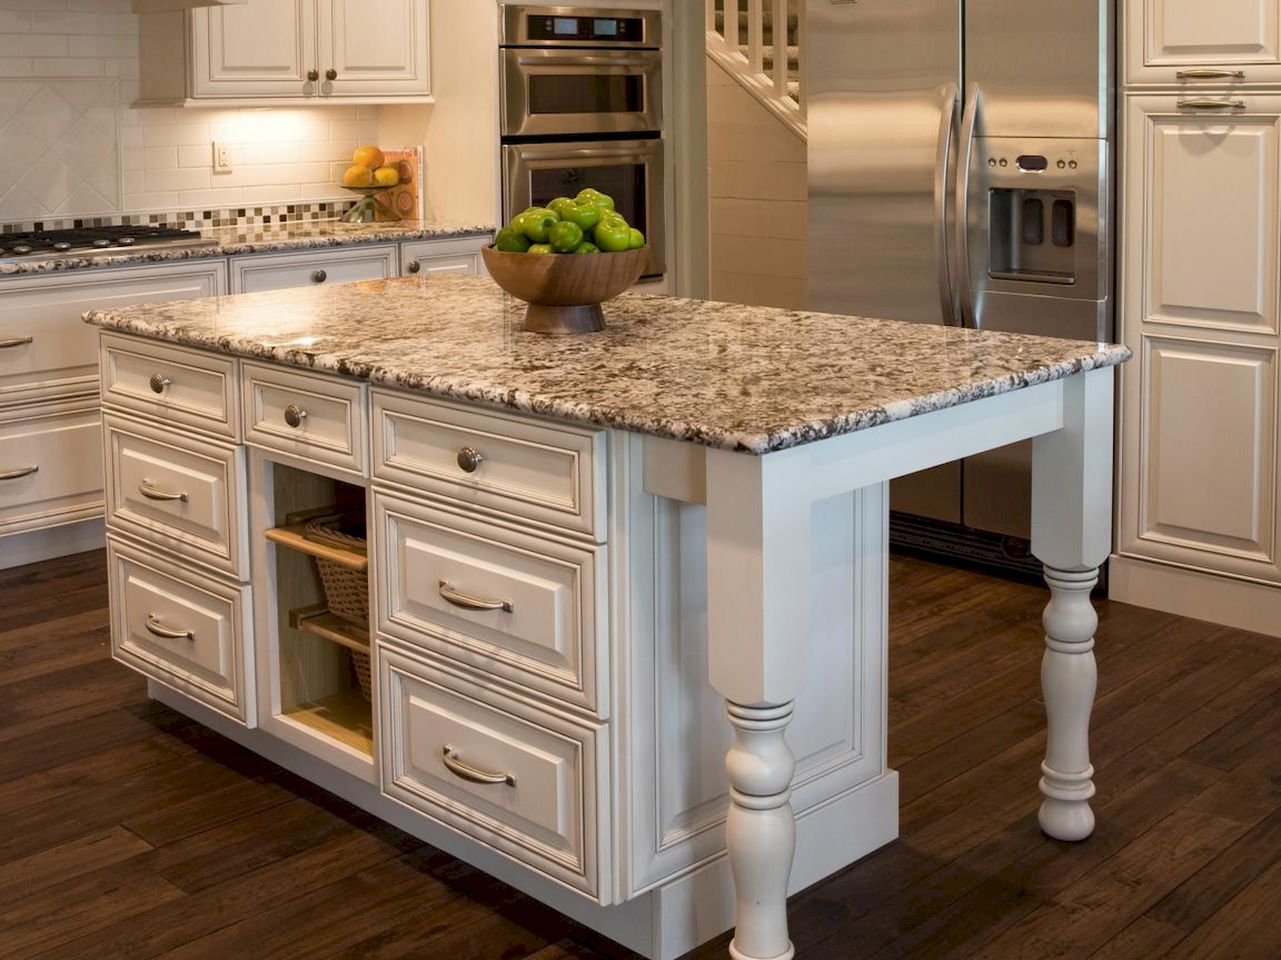 Granite Top Kitchen Island With Seating photo - 1